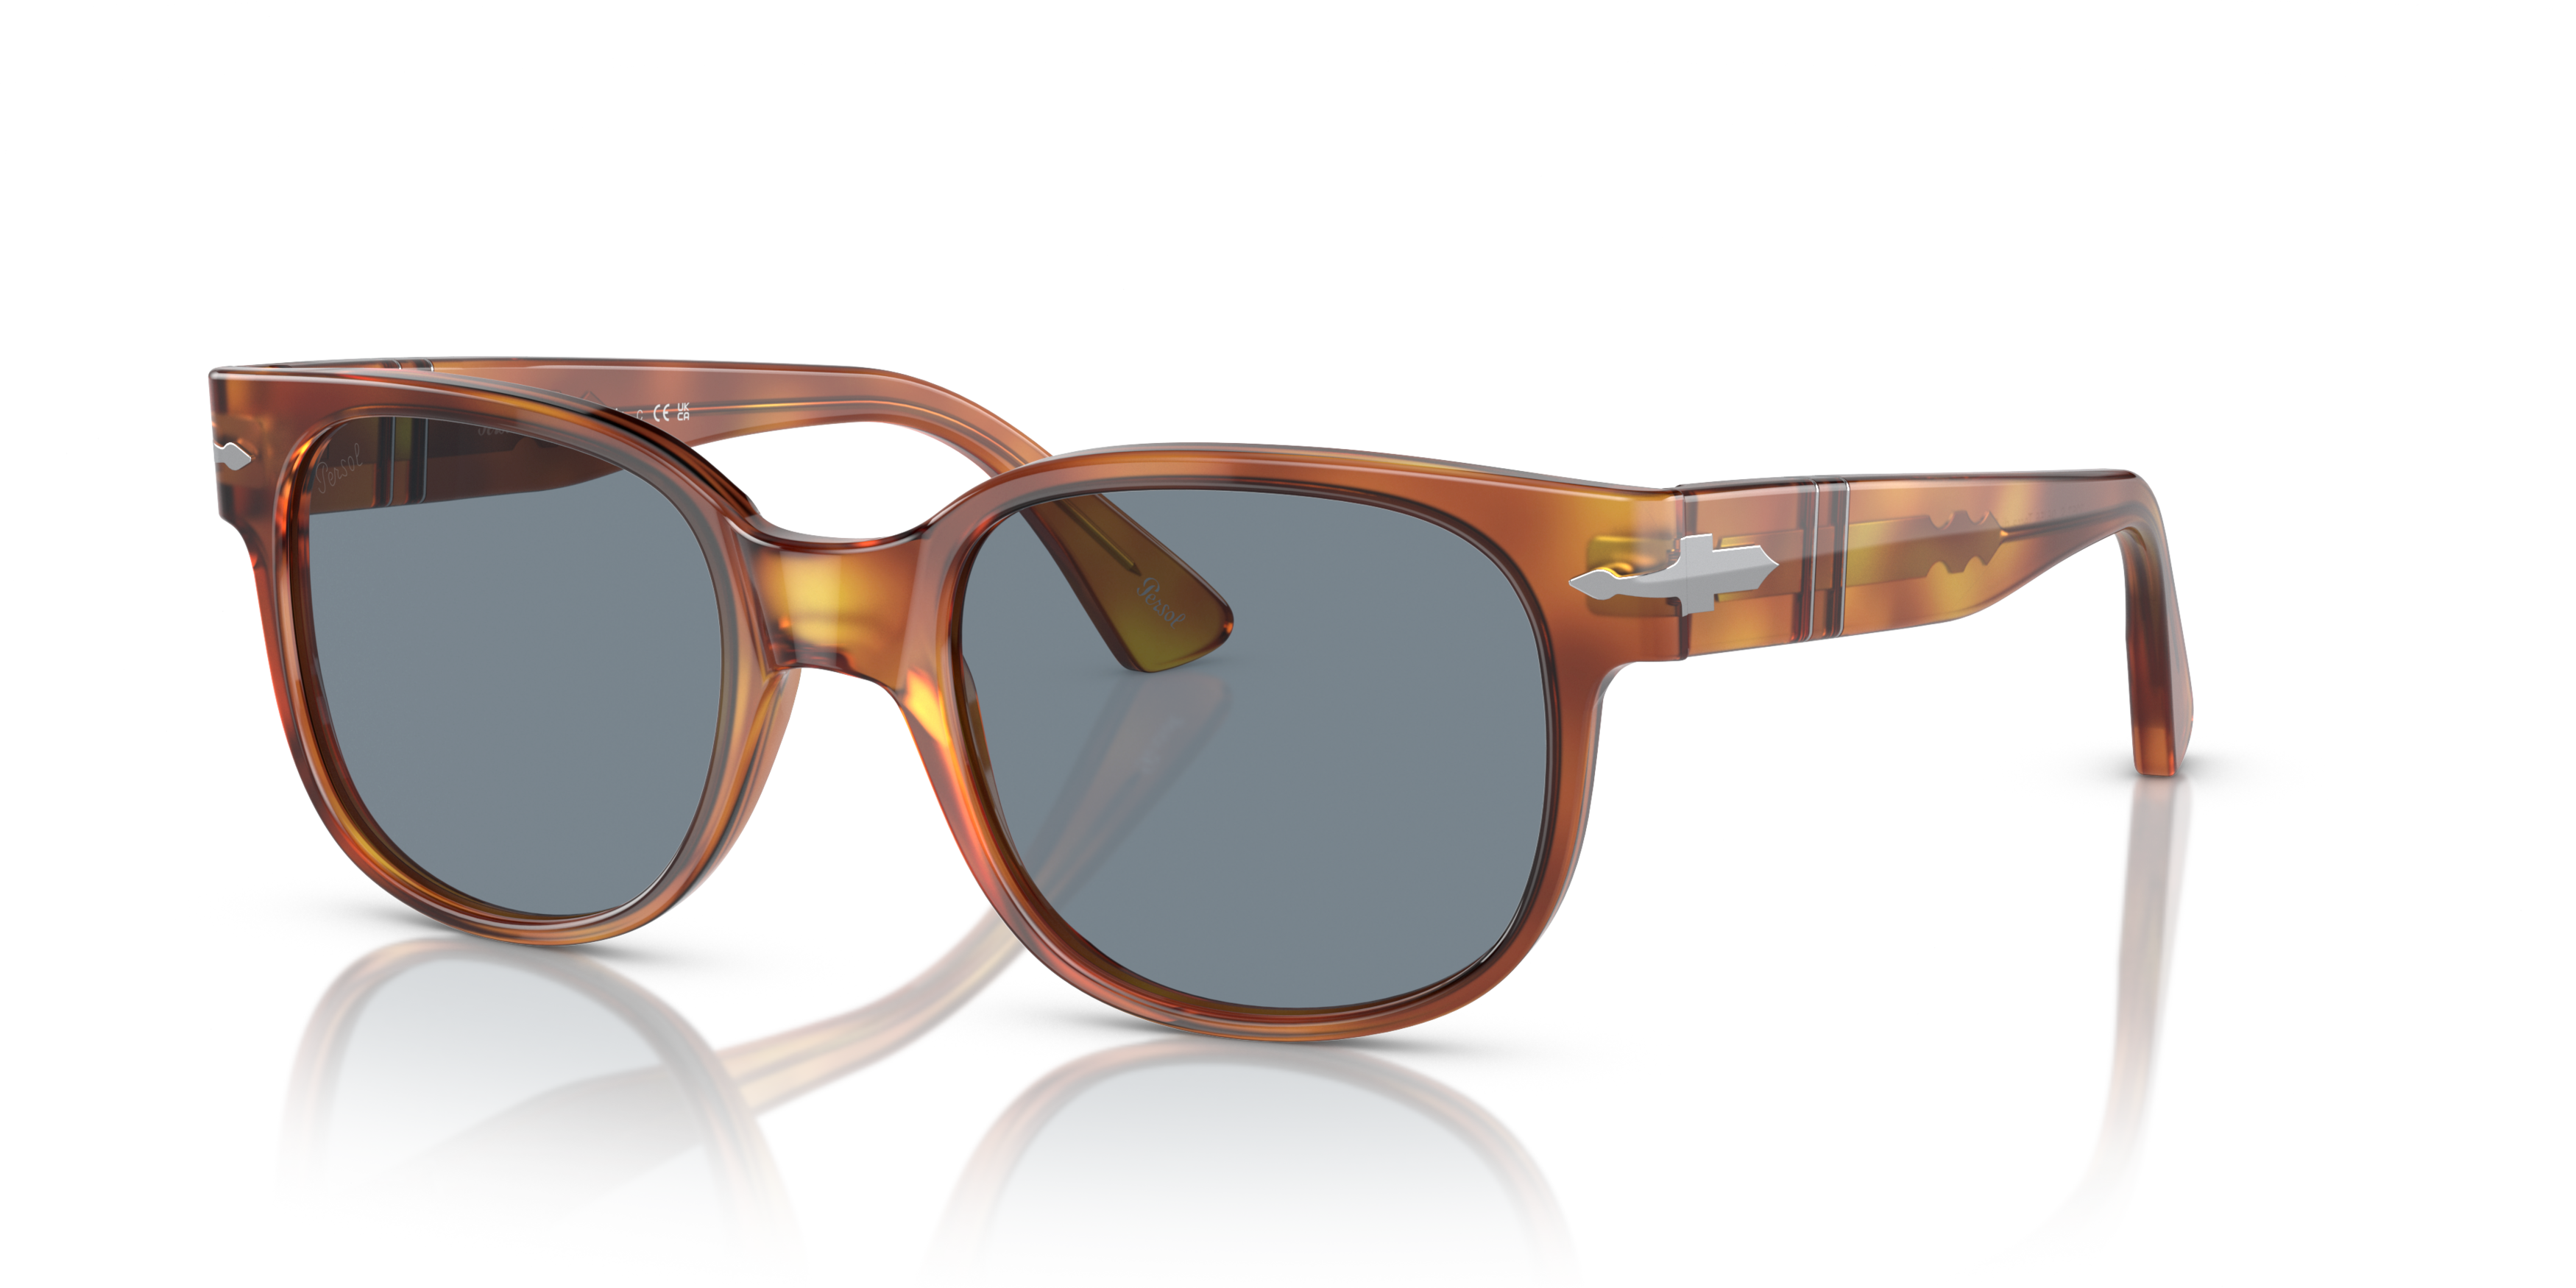 [products.image.angle_left01] Persol 0PO3257S 96/56